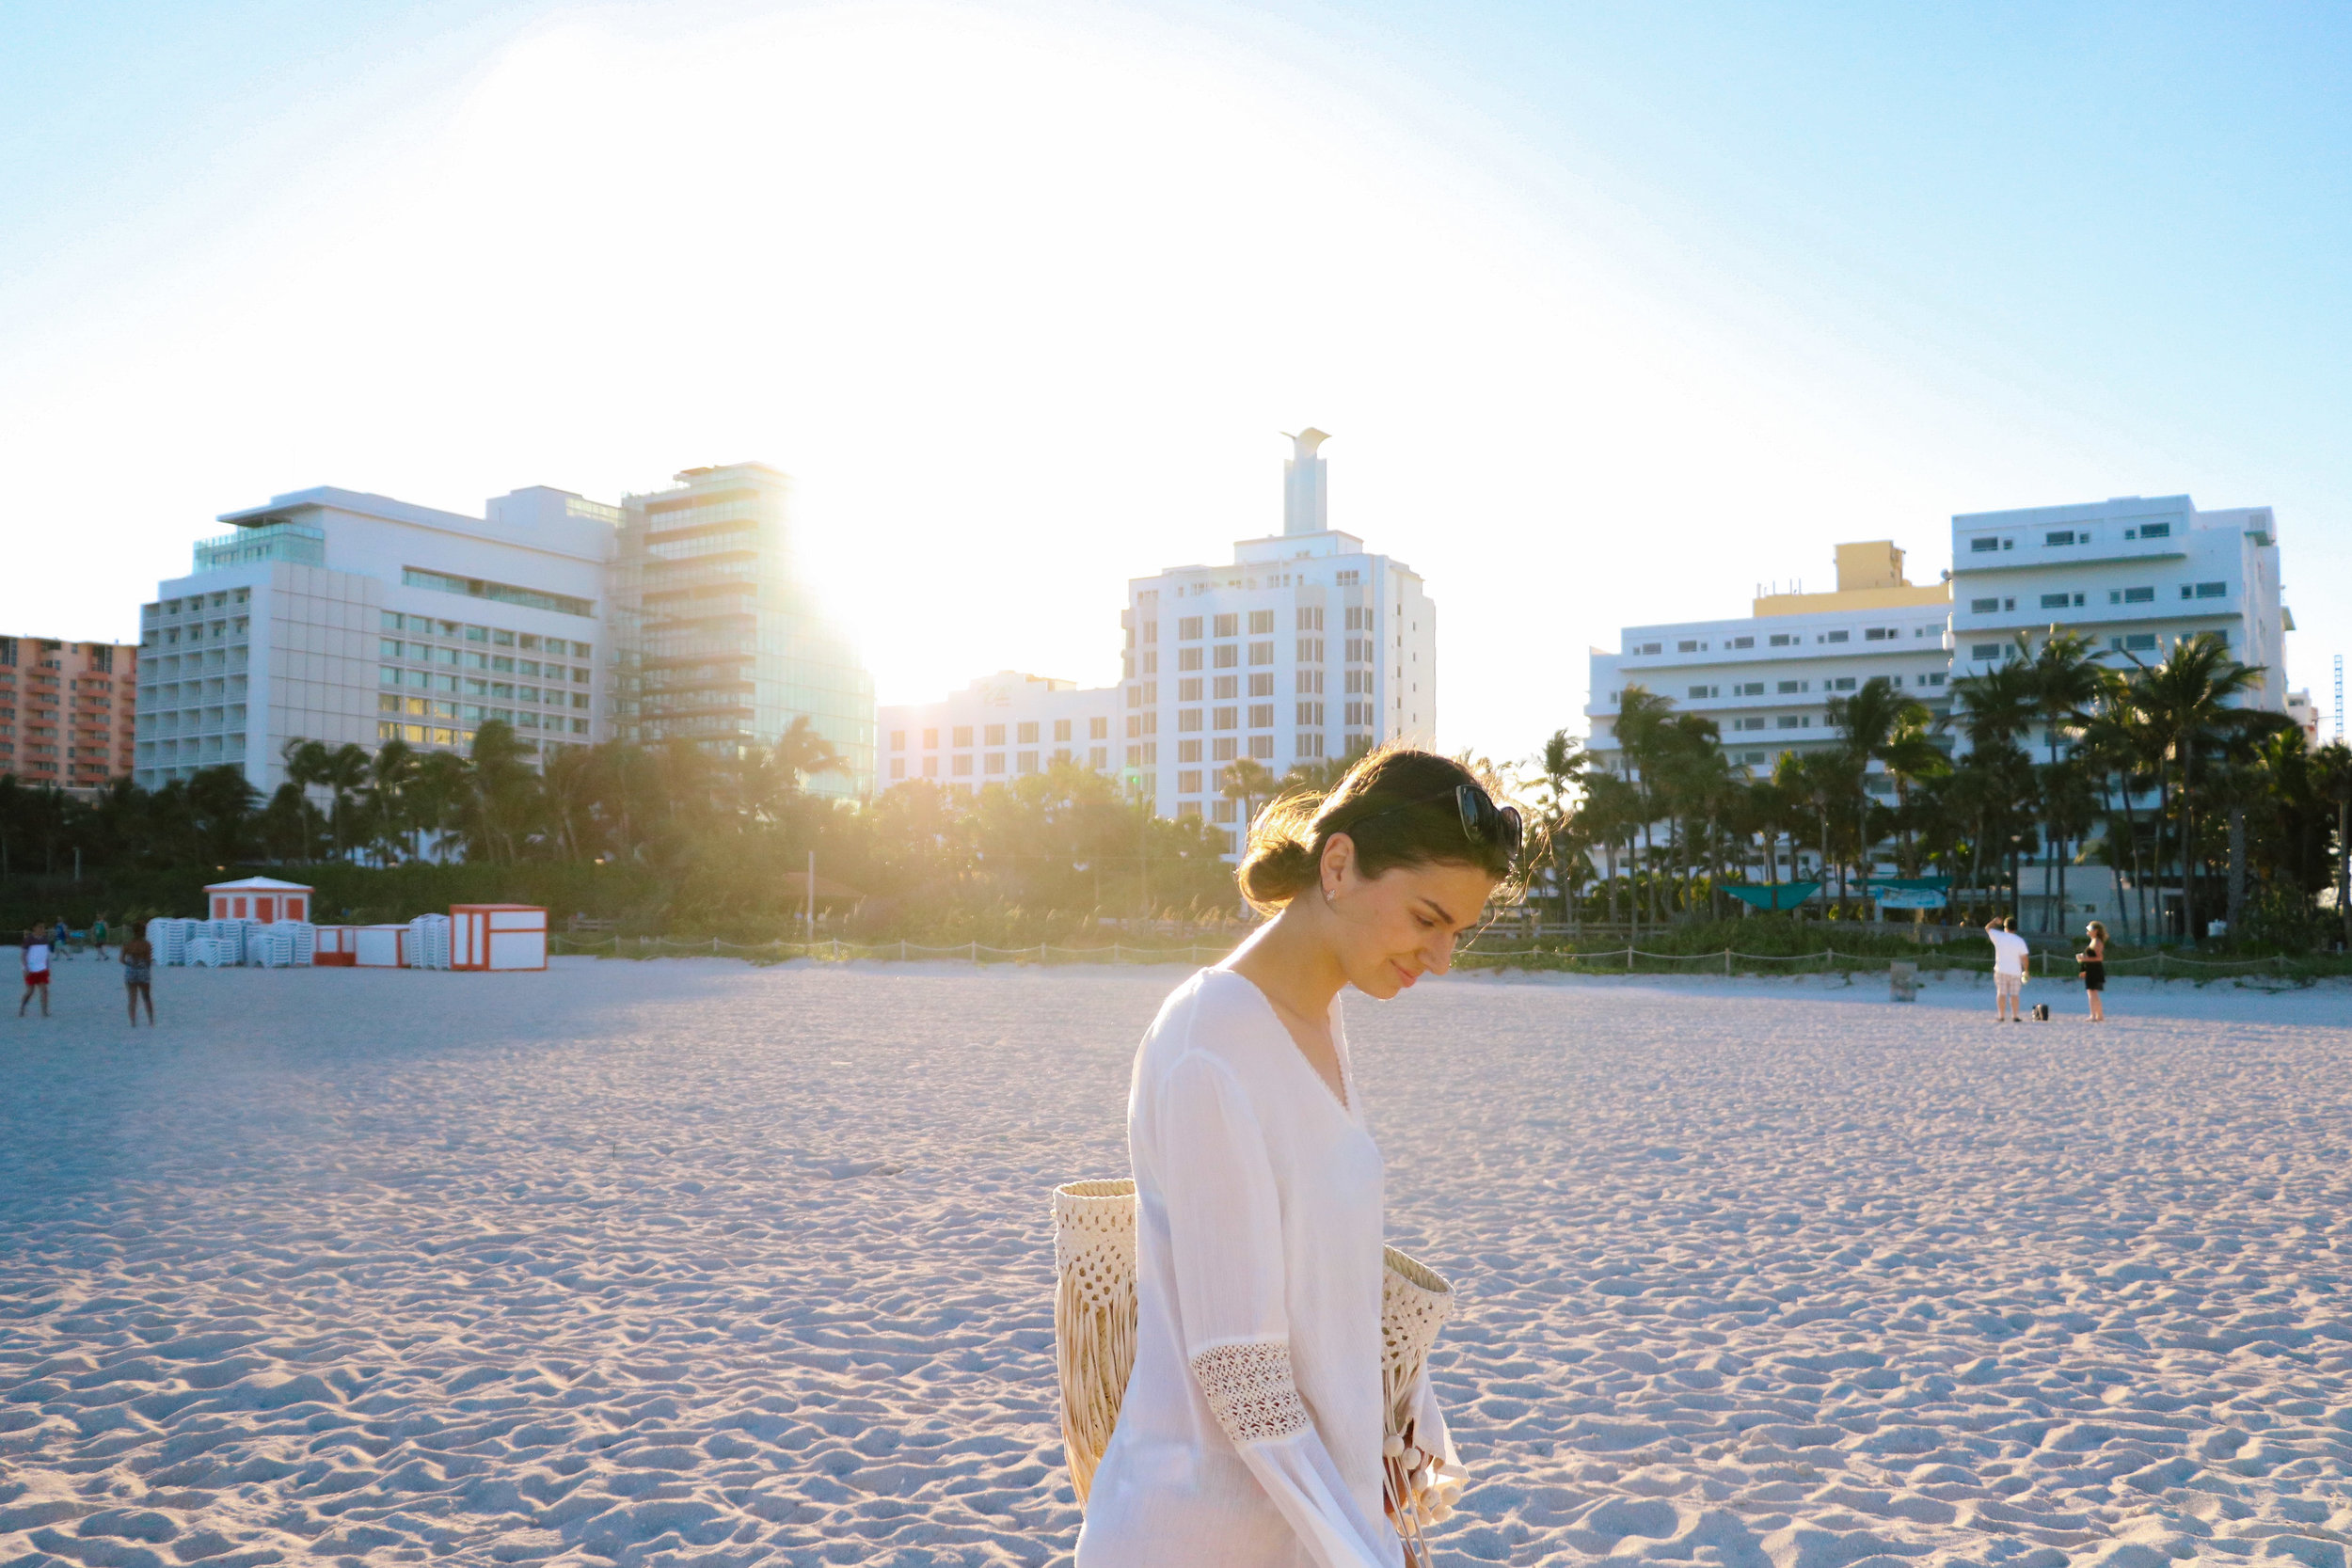 Miami Beach EDITION - By Courtney Brown